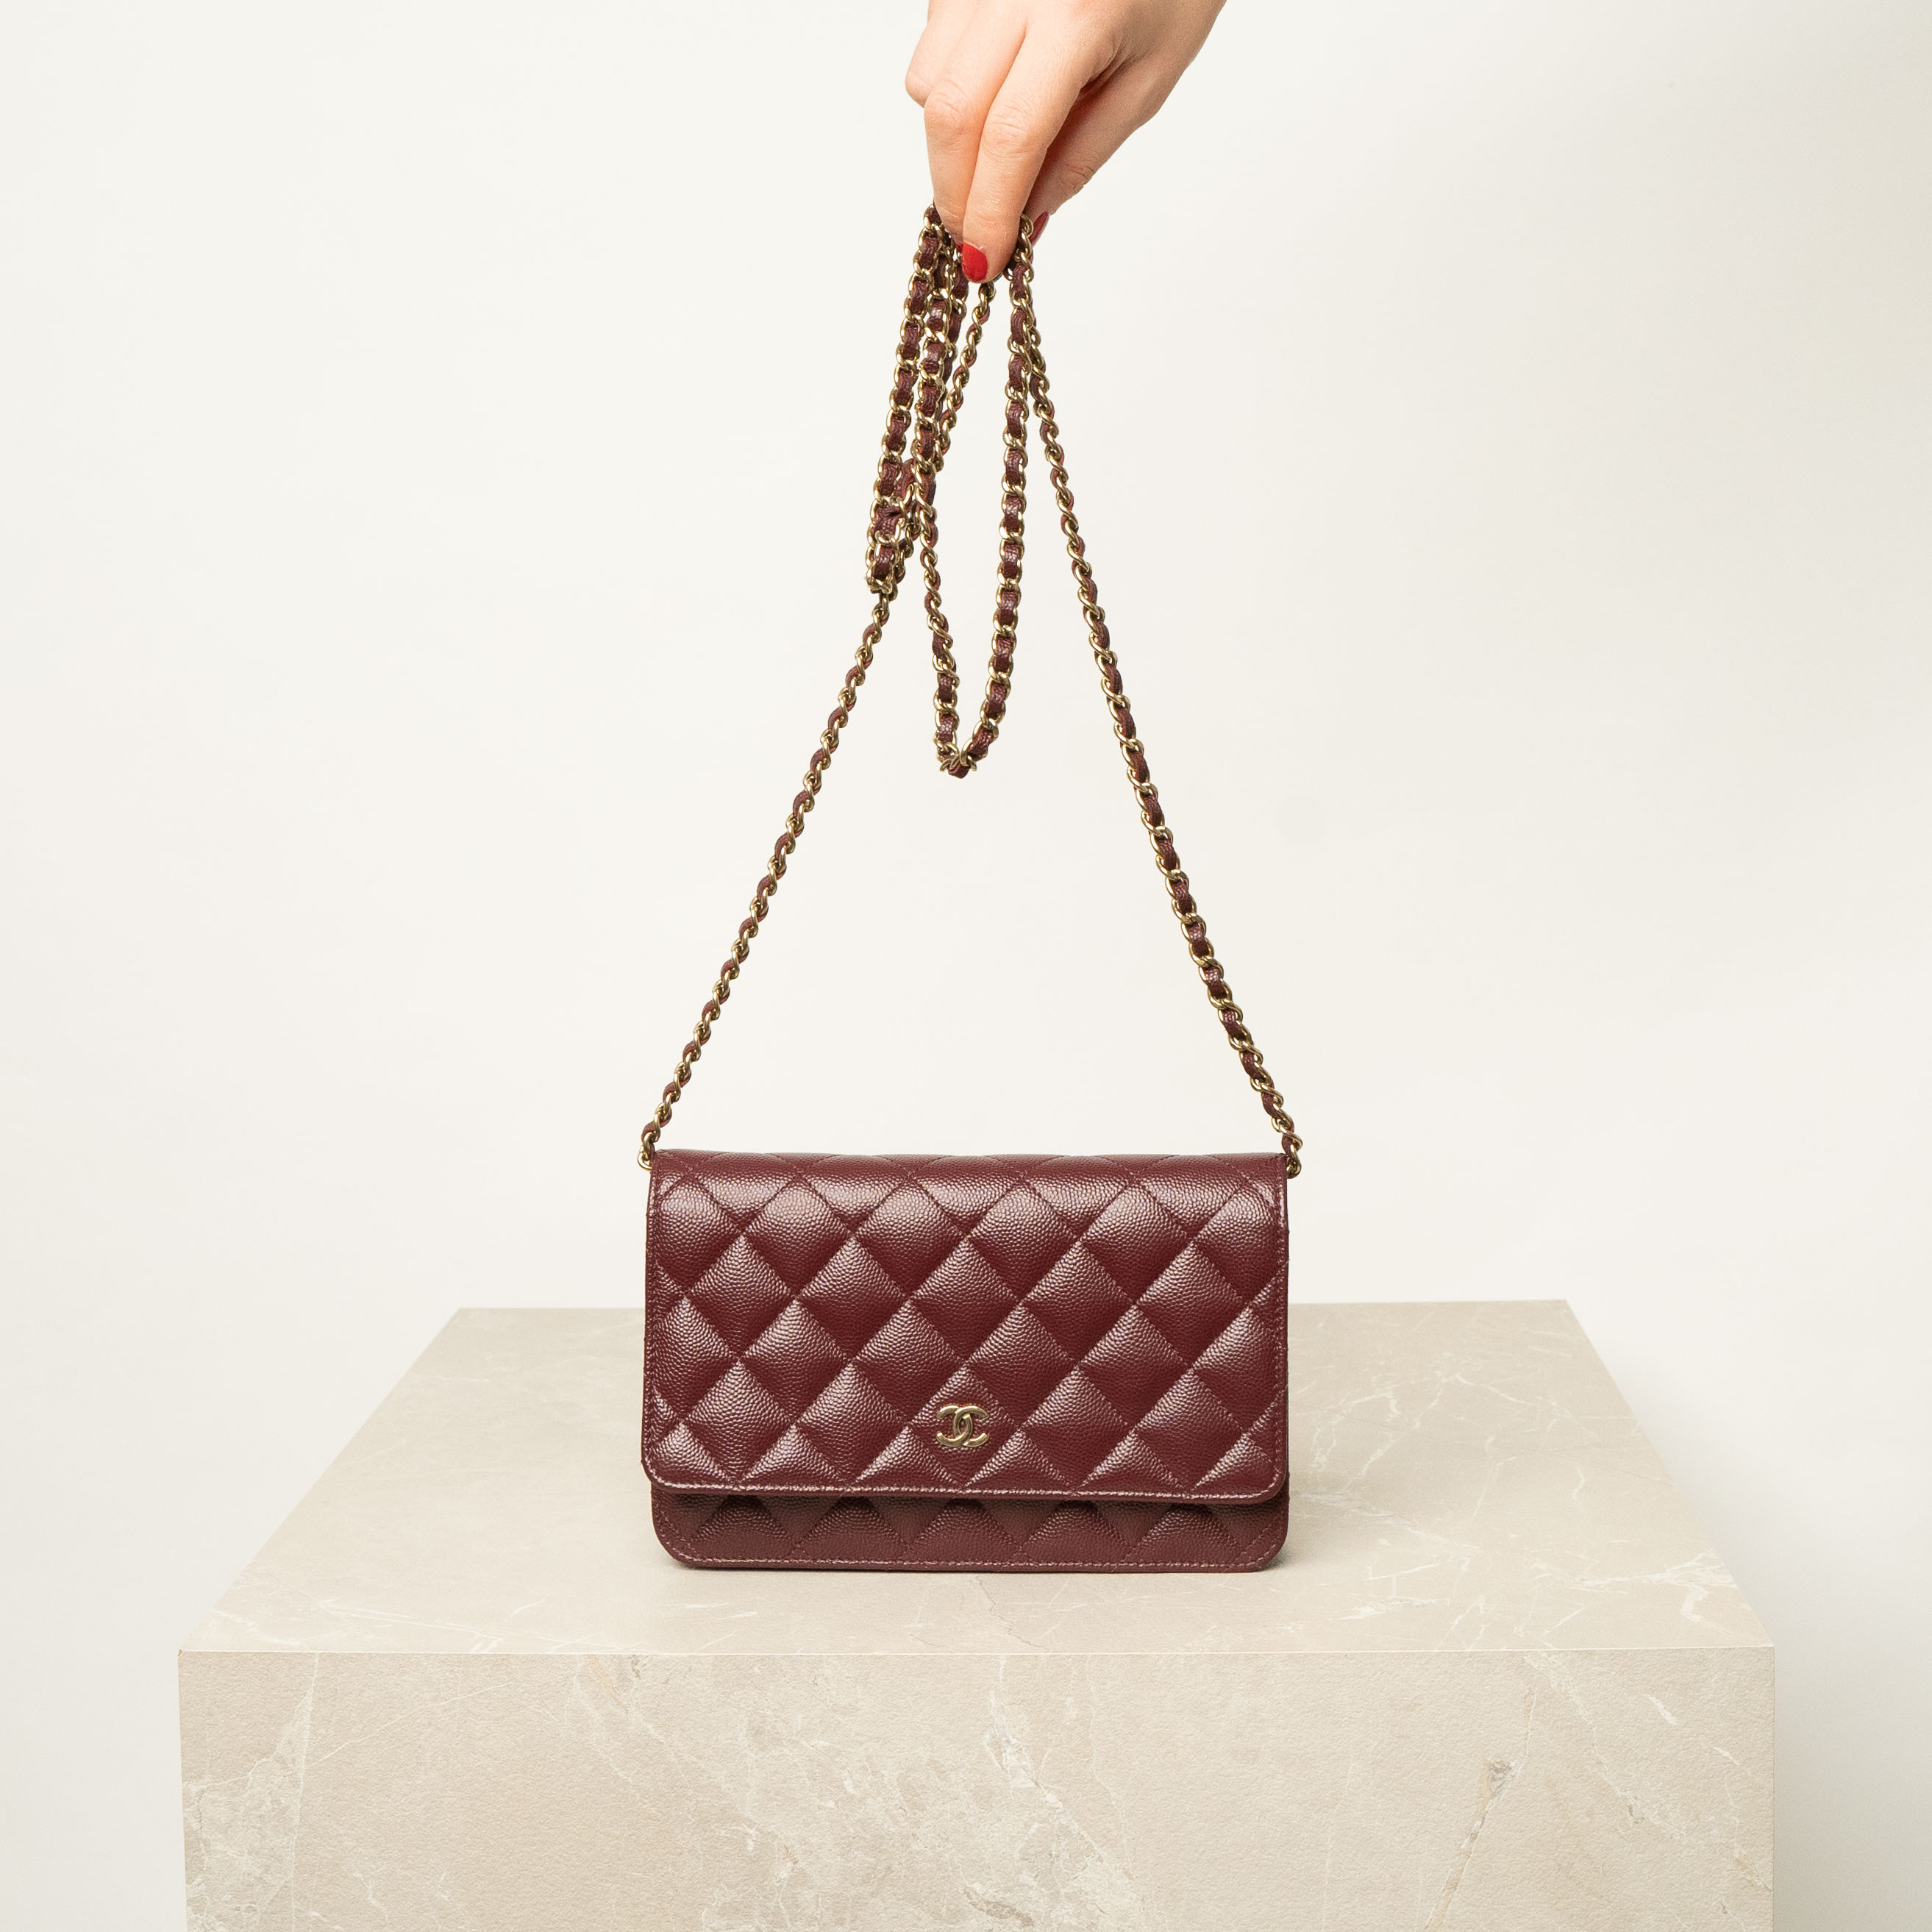 Chanel Bordeaux Wallet on Chain WOC Caviar Leather with Champagne Hardware